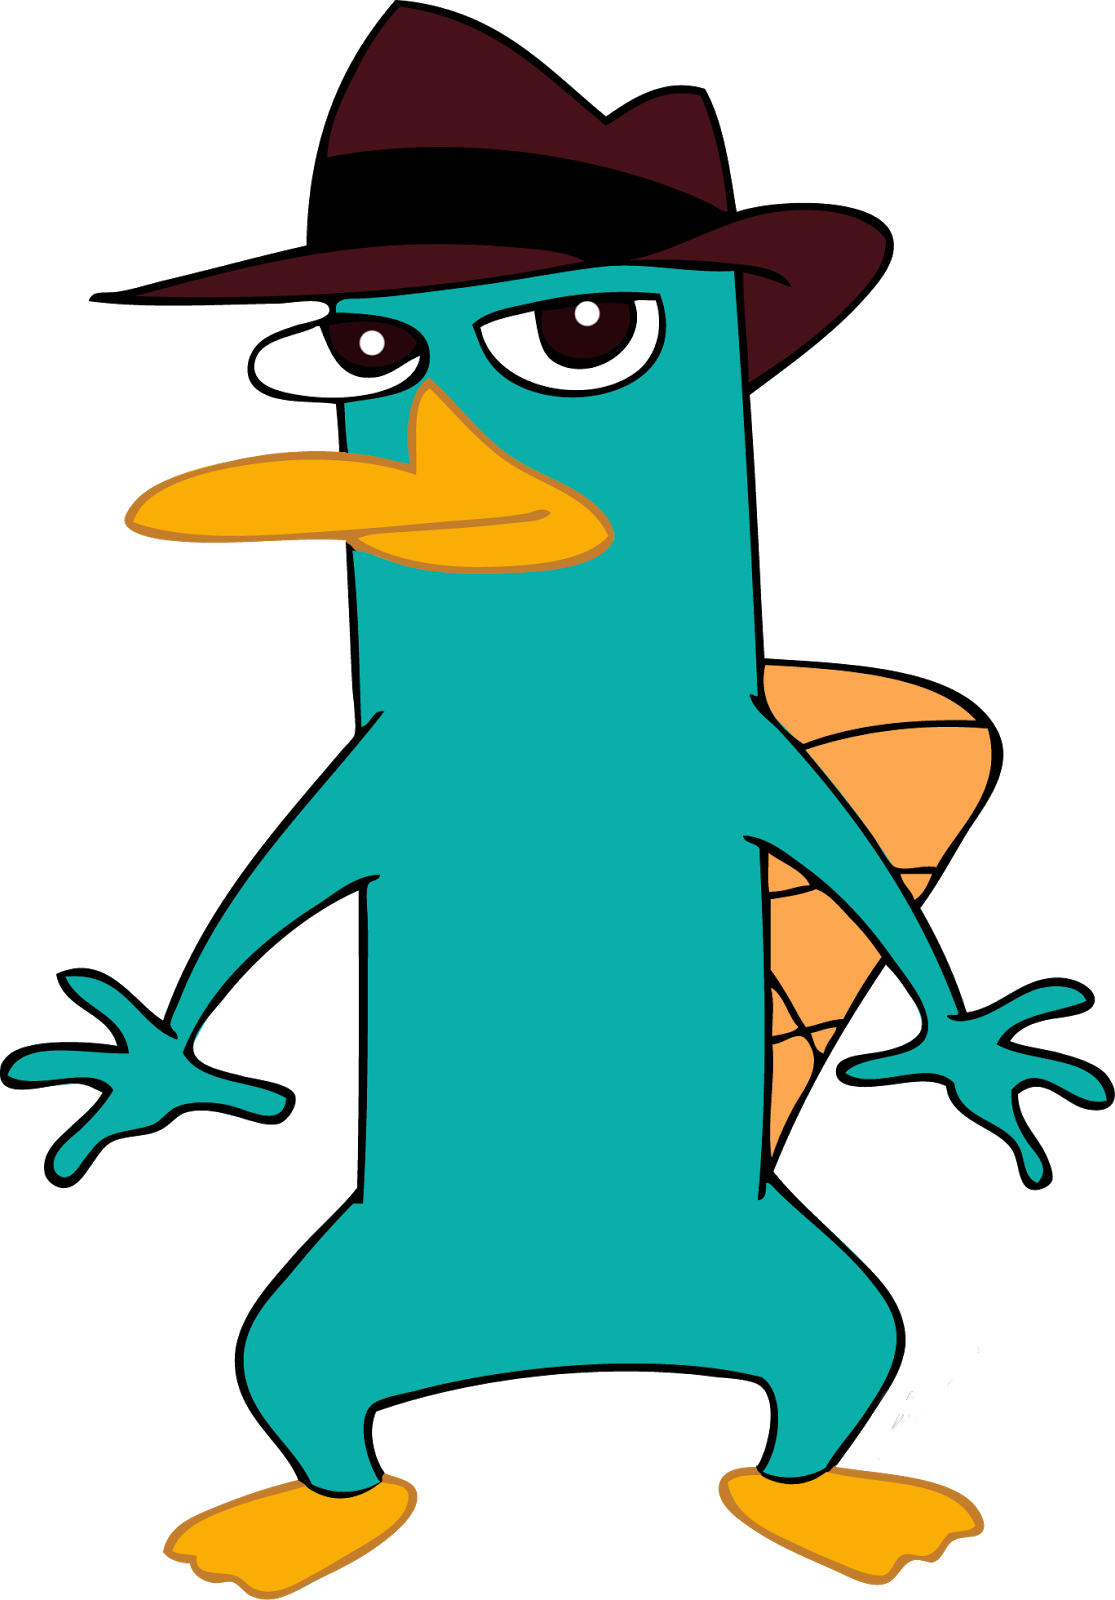 5 Kbyte, V - Agent Perry The Platypus (1115x1600)